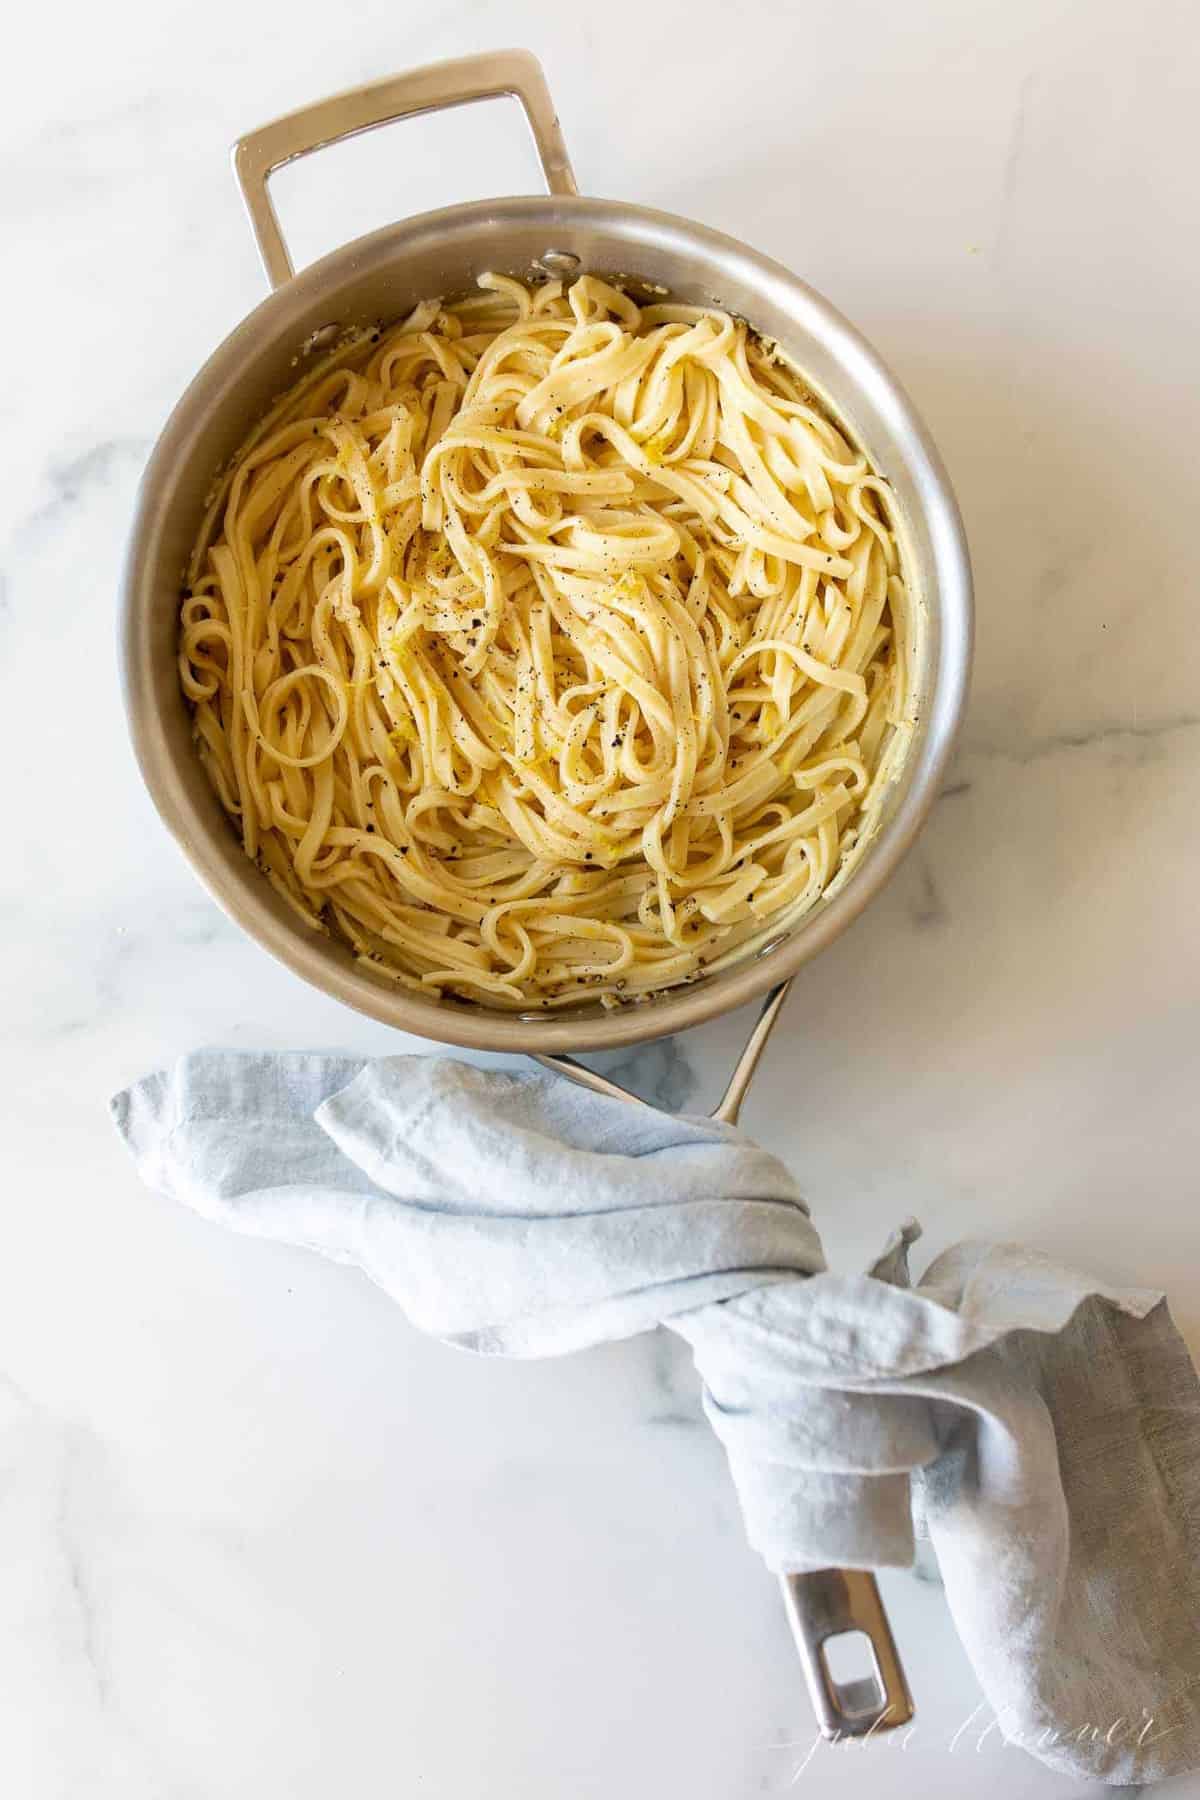 A silver pan filled with cooked fettuccine, blue linen towel wrapped around handle